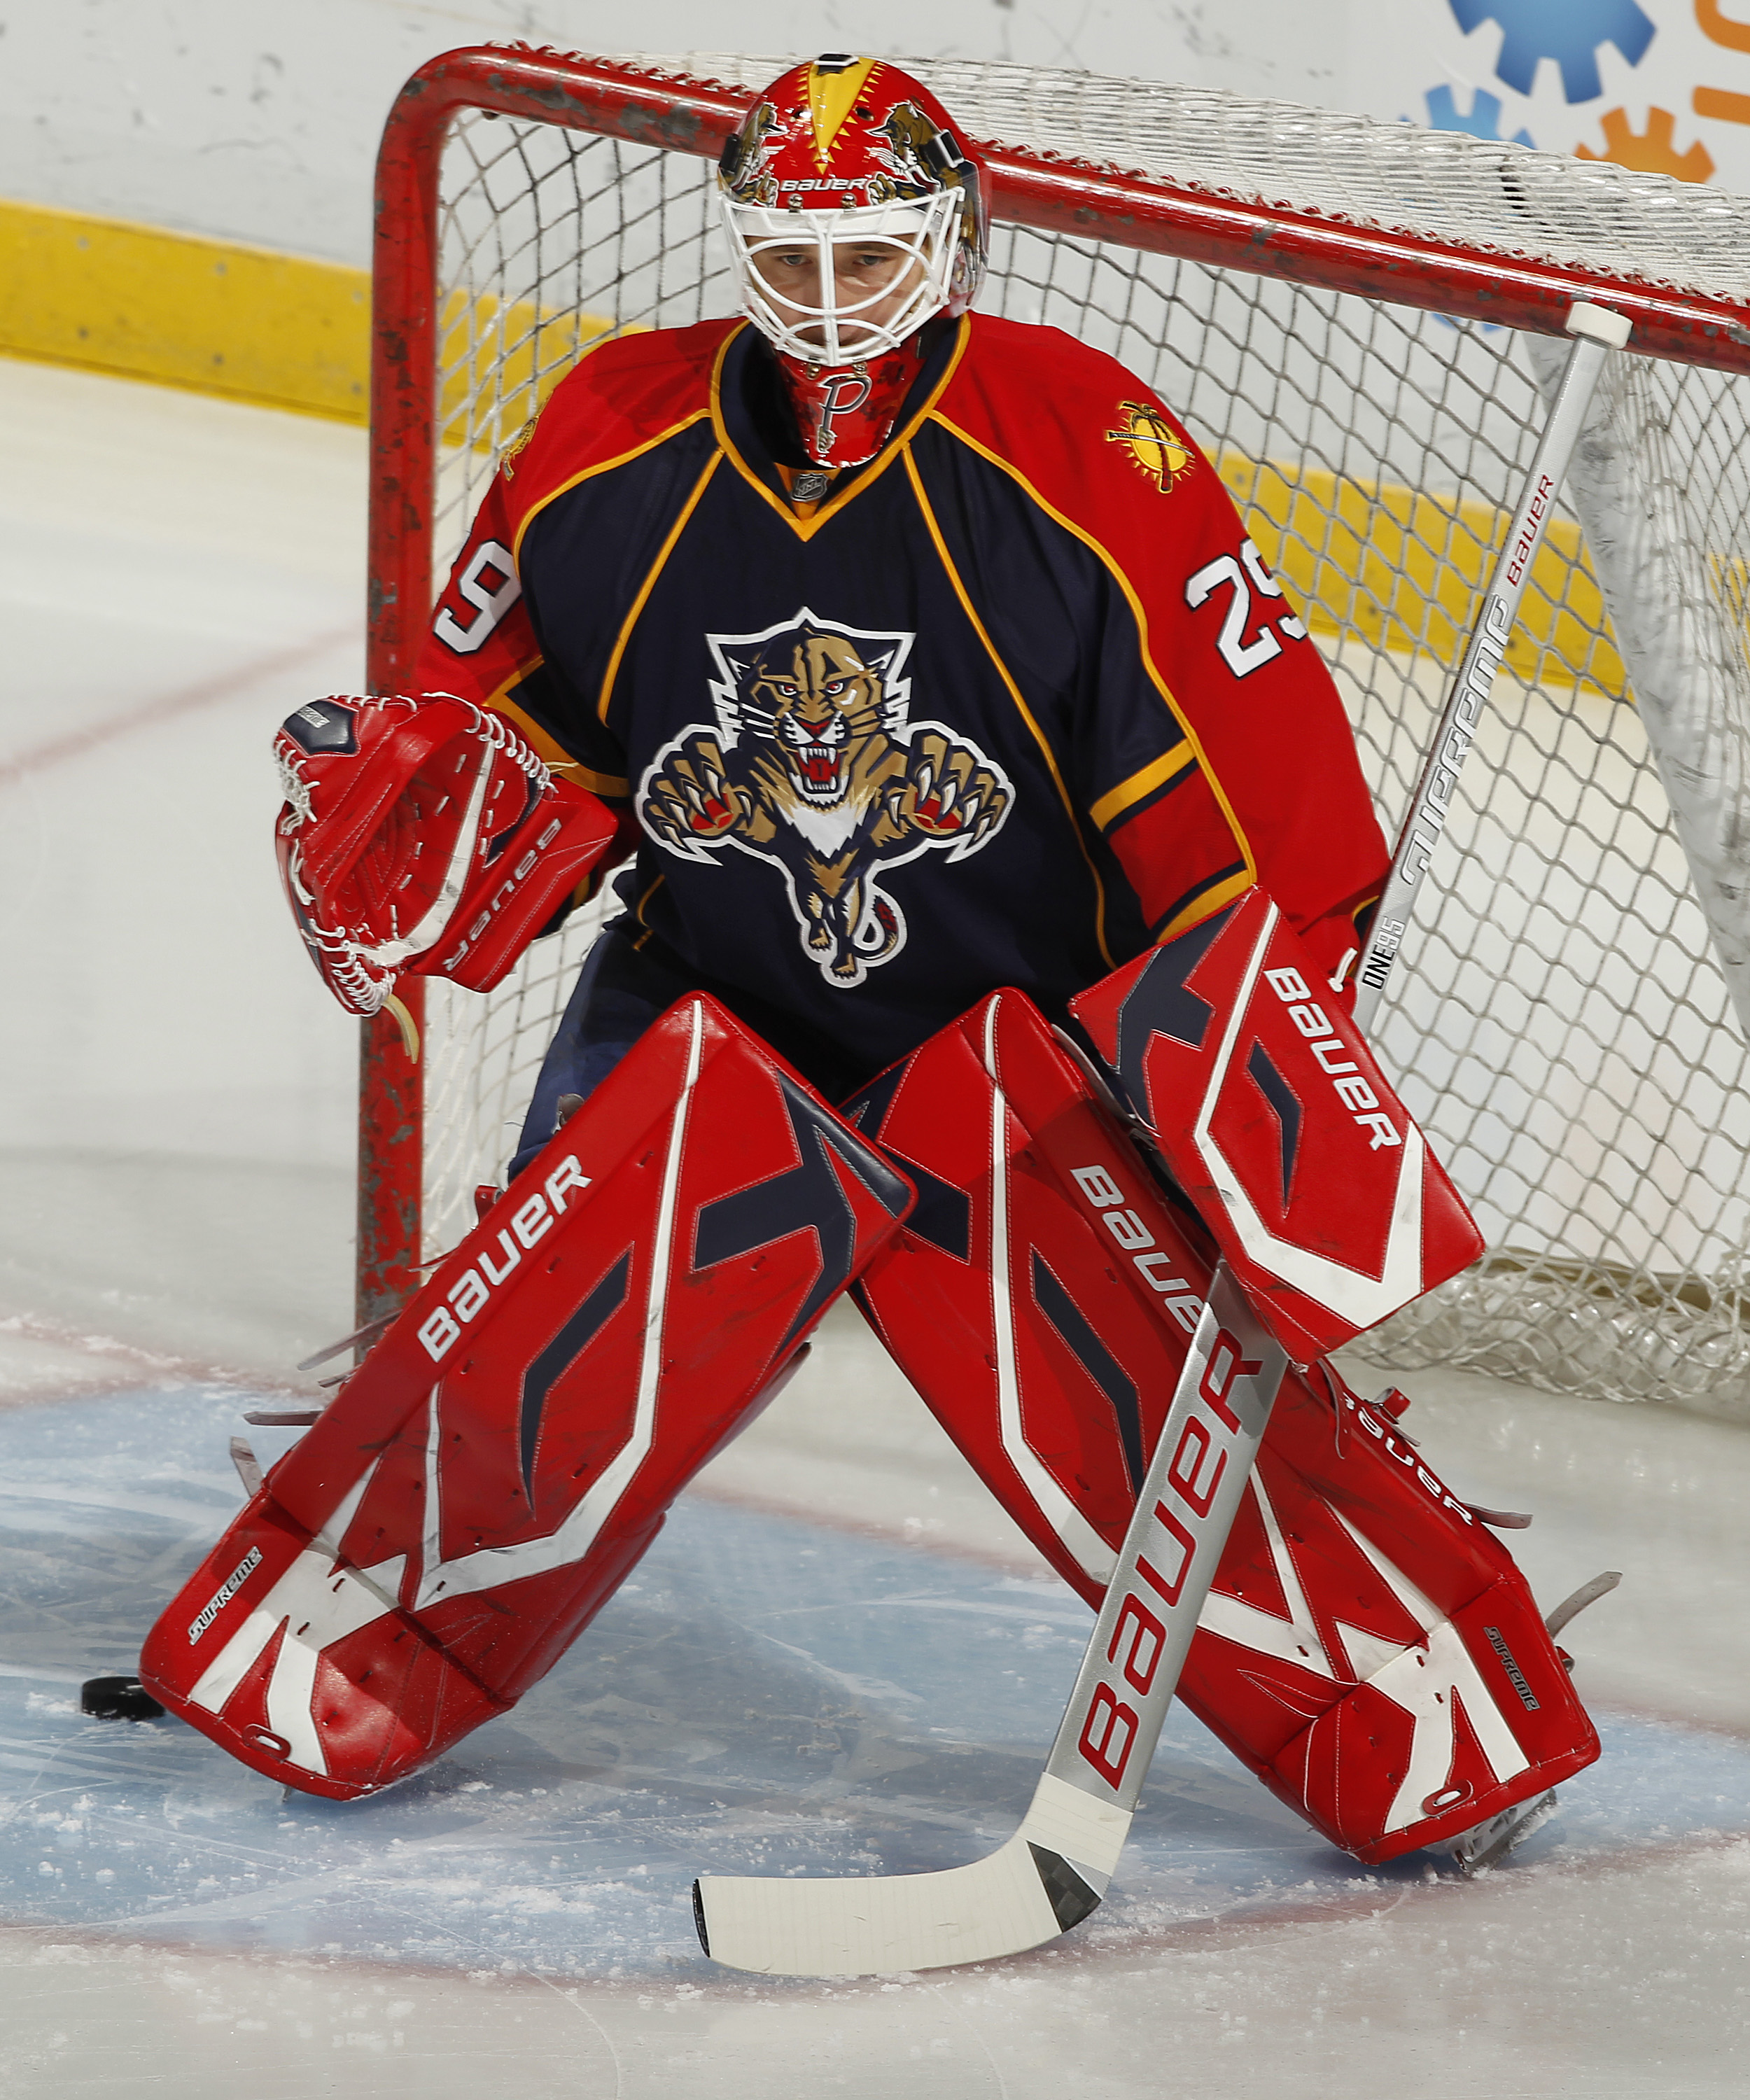 SUNRISE, FL - DECEMBER 7: Goaltender Tomas Vokoun #29 of the Florida Panthers warms up prior to the game against the Colorado Avalanche on December 7, 2010 at the BankAtlantic Center in Sunrise, Florida. (Photo by Joel Auerbach/Getty Images)